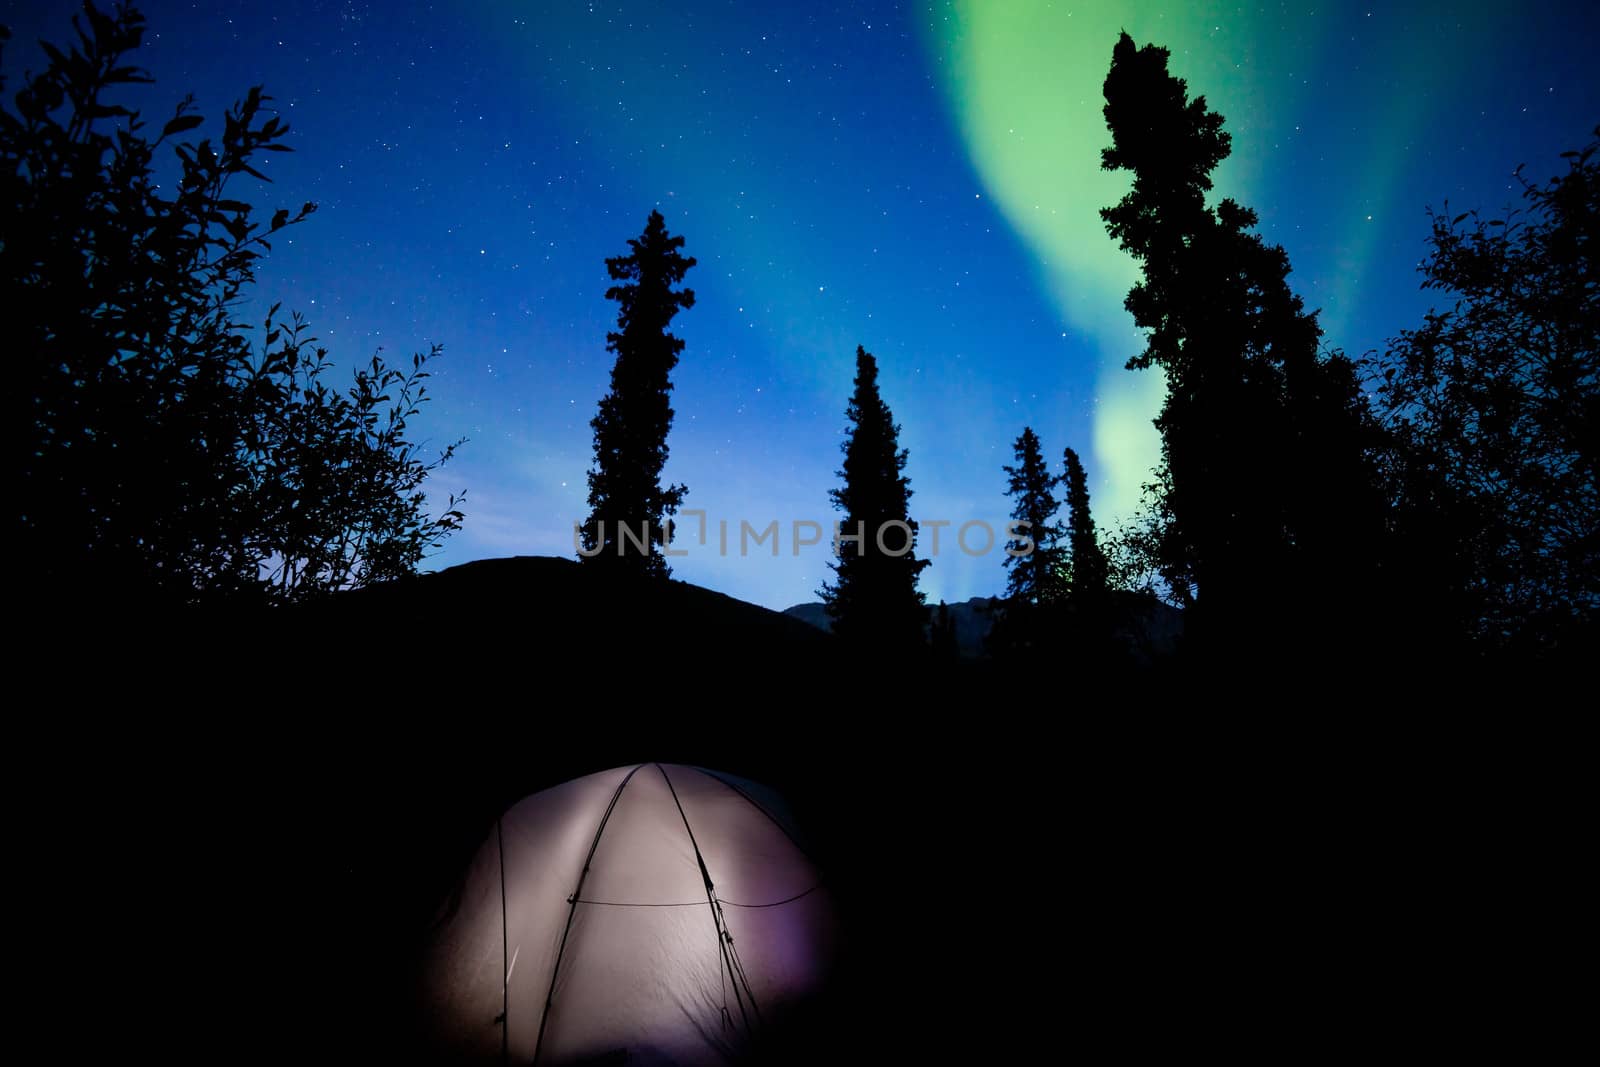 Taiga tent illuminated under northern lights flare by PiLens